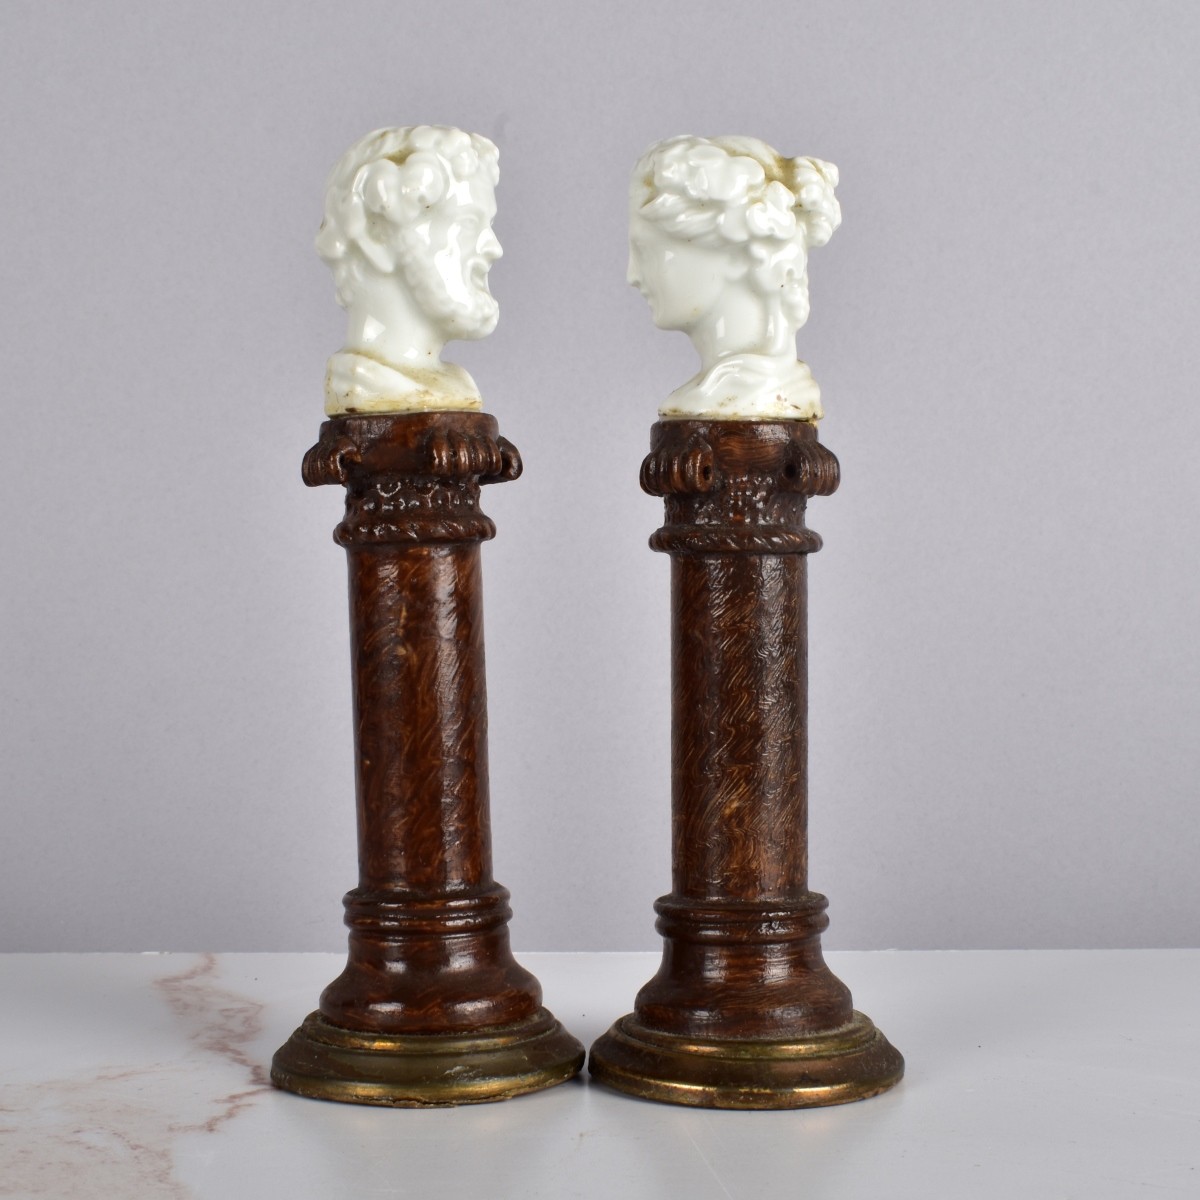 Pair of Antique Continental Miniature Busts